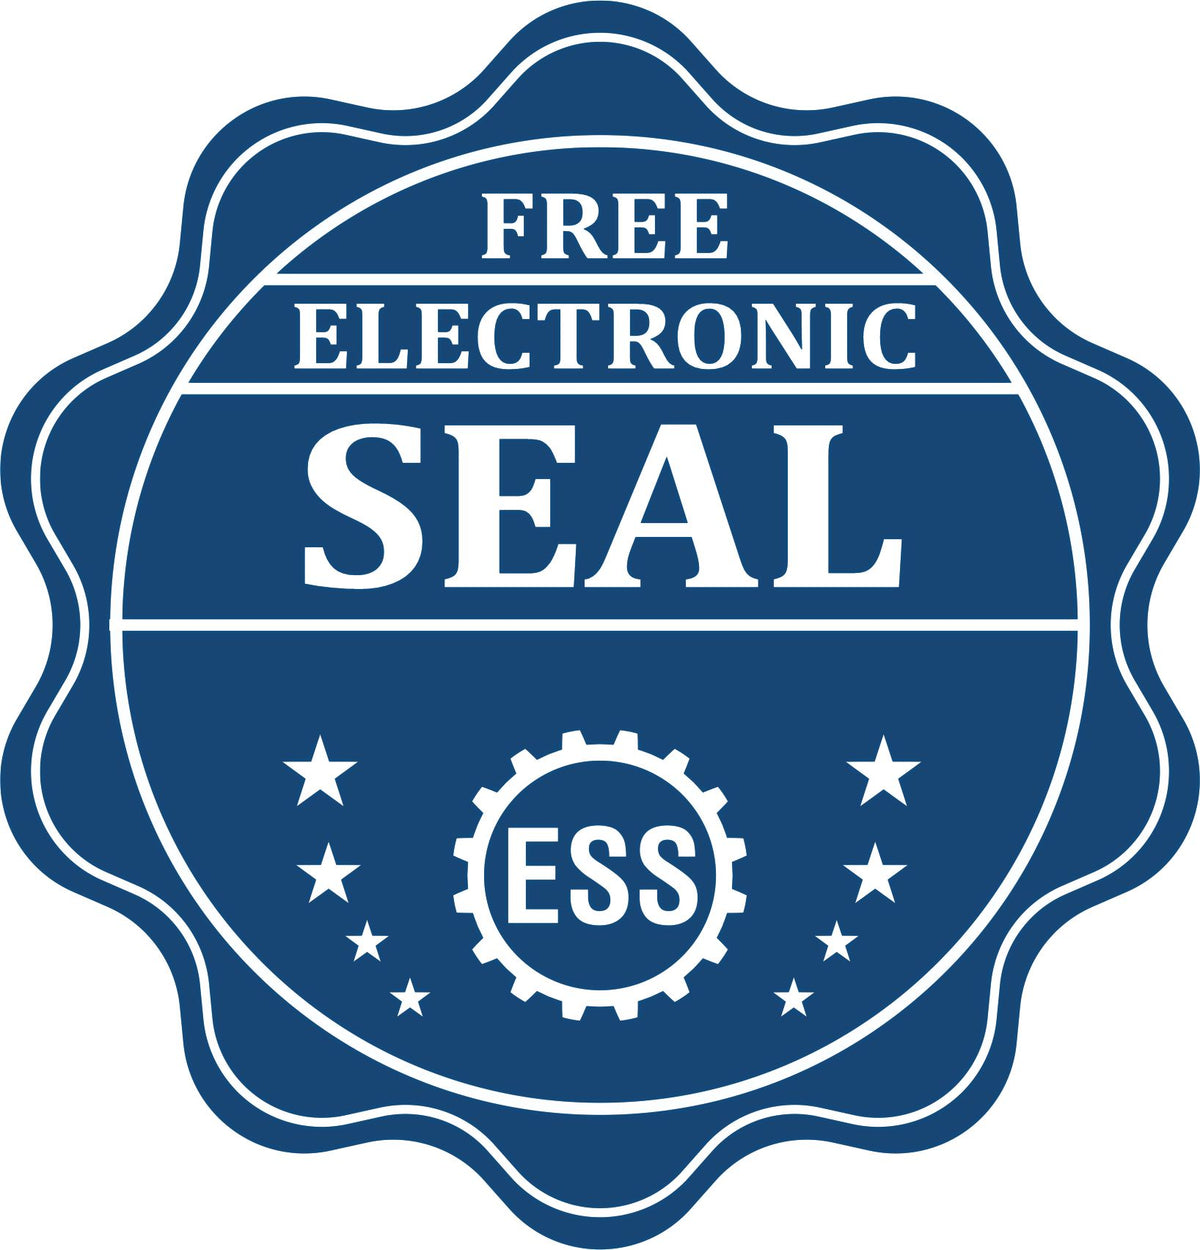 A badge showing a free electronic seal for the Hybrid Utah Landscape Architect Seal with stars and the ESS gear on the emblem.